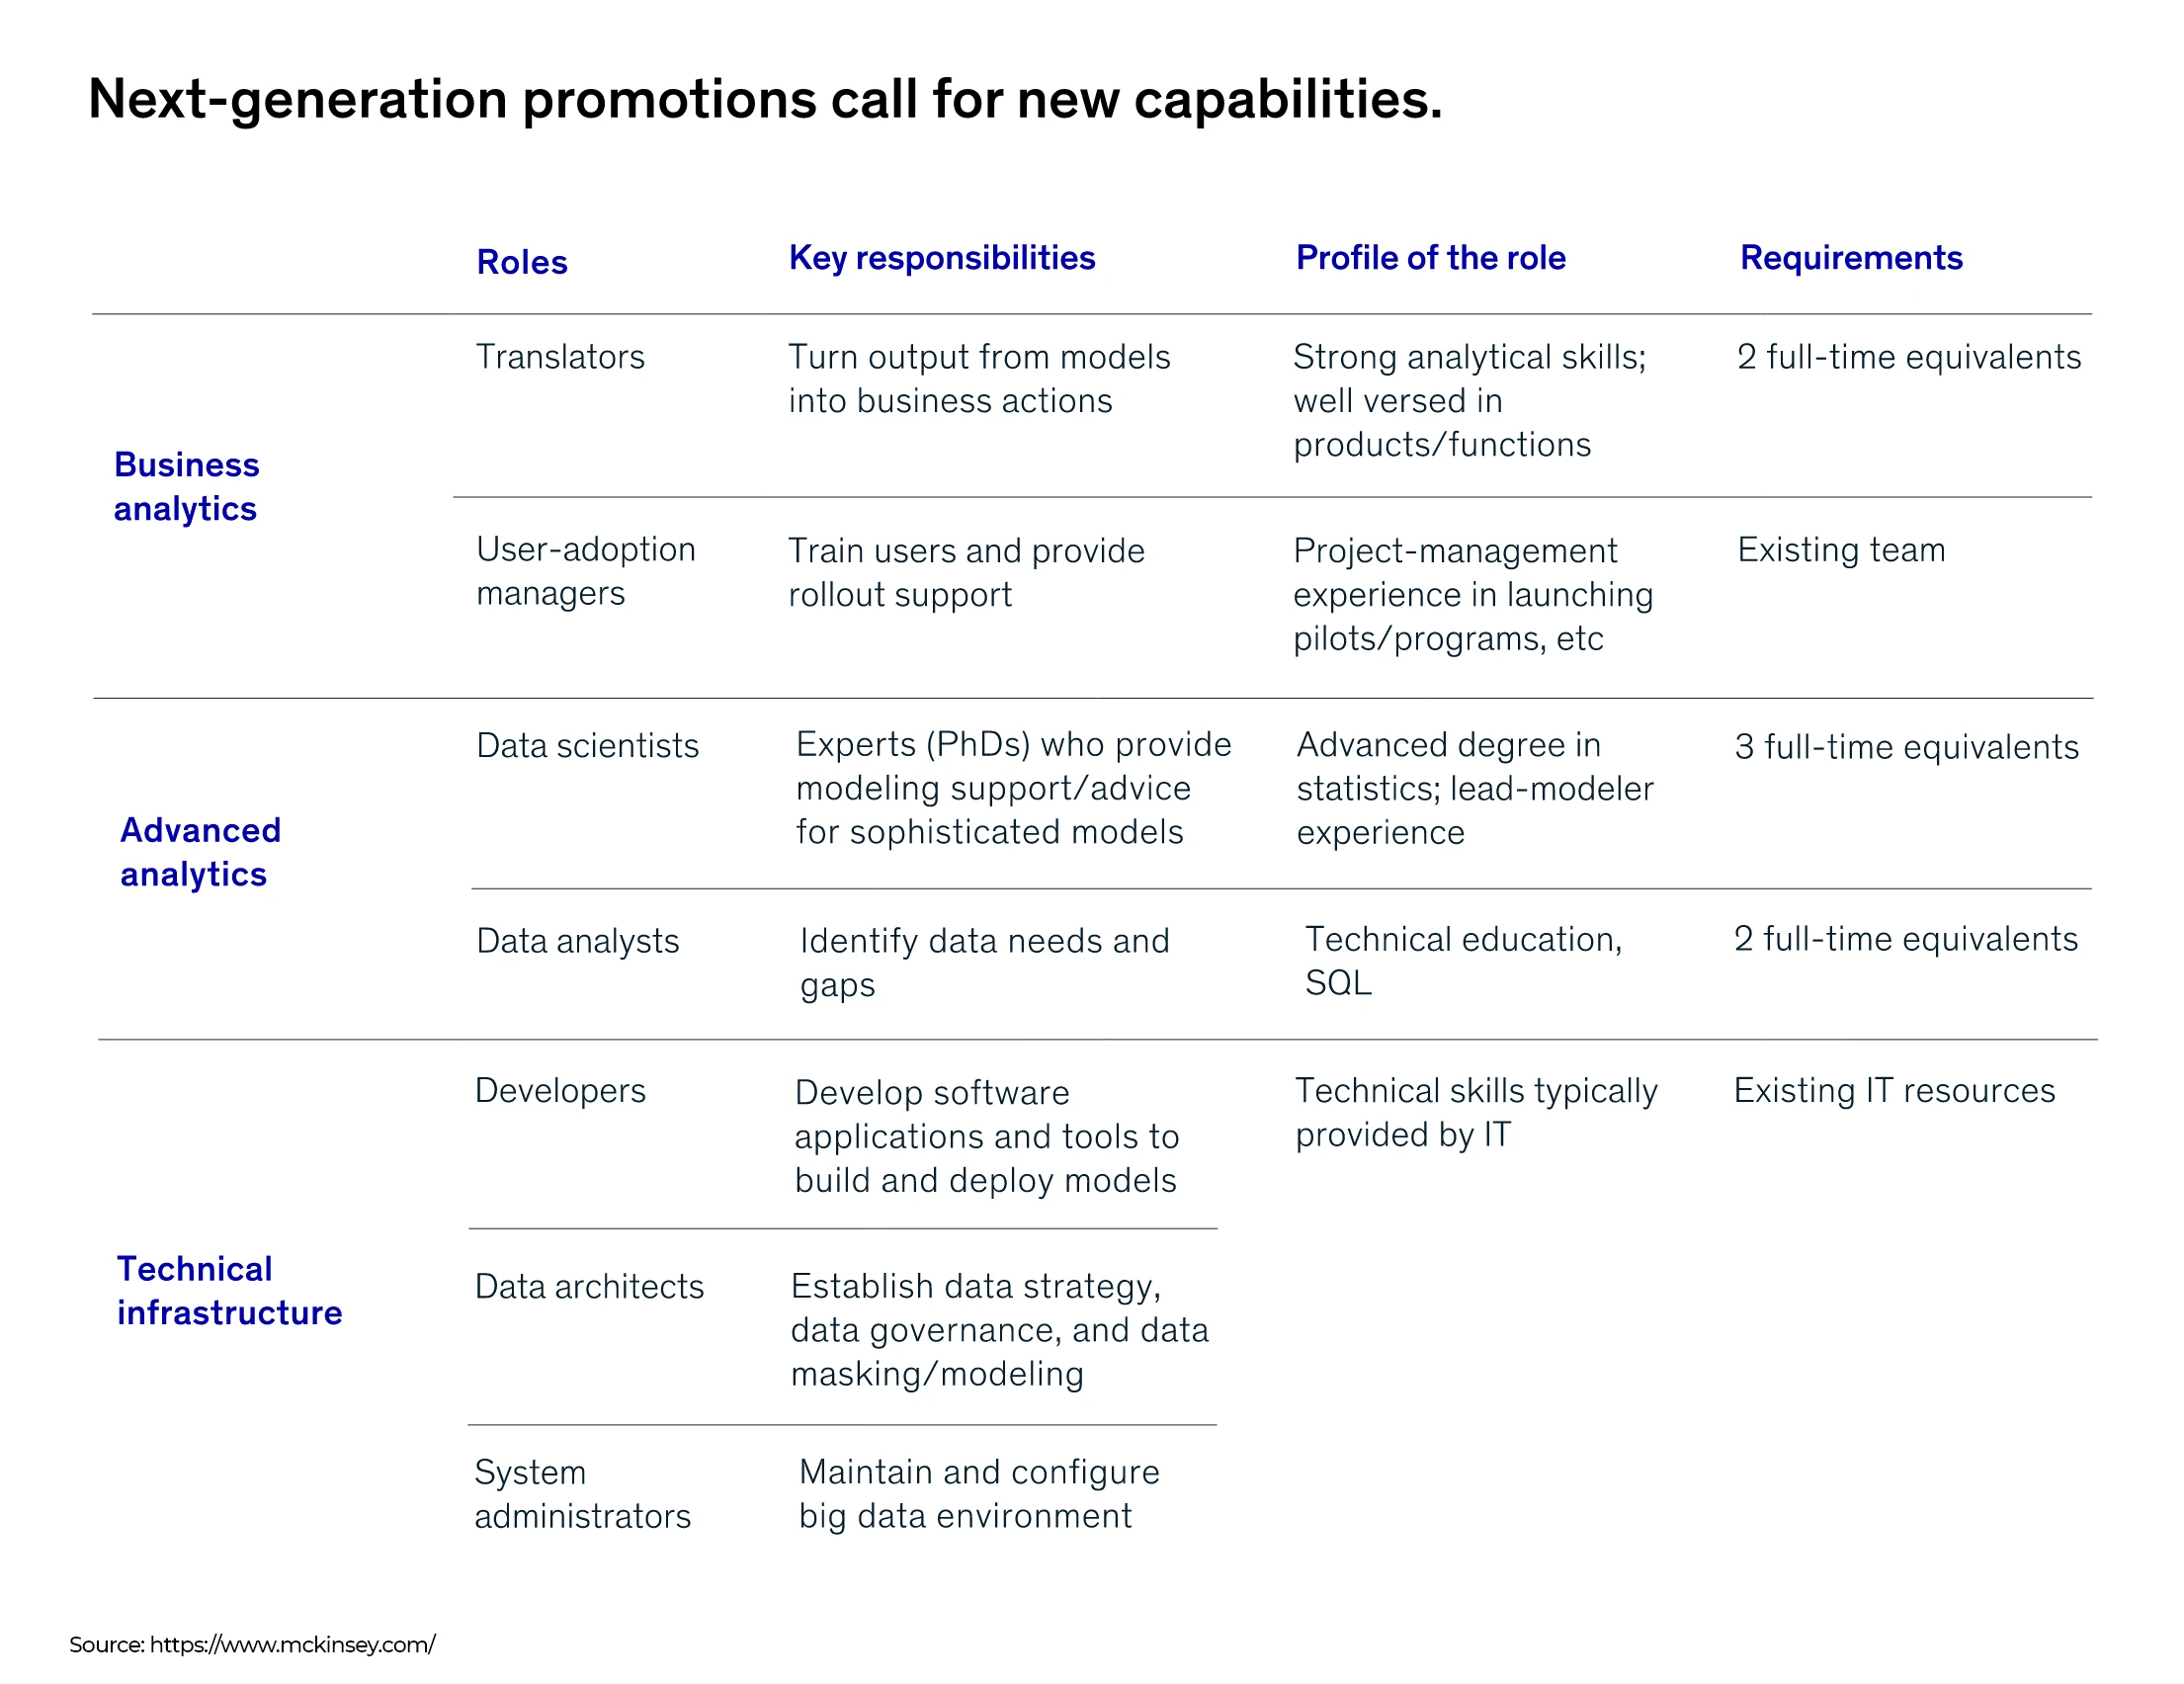 Next Gen Promotion Call for New Opportunities - Advanced Analytics Uses - Polestar Solutions USA